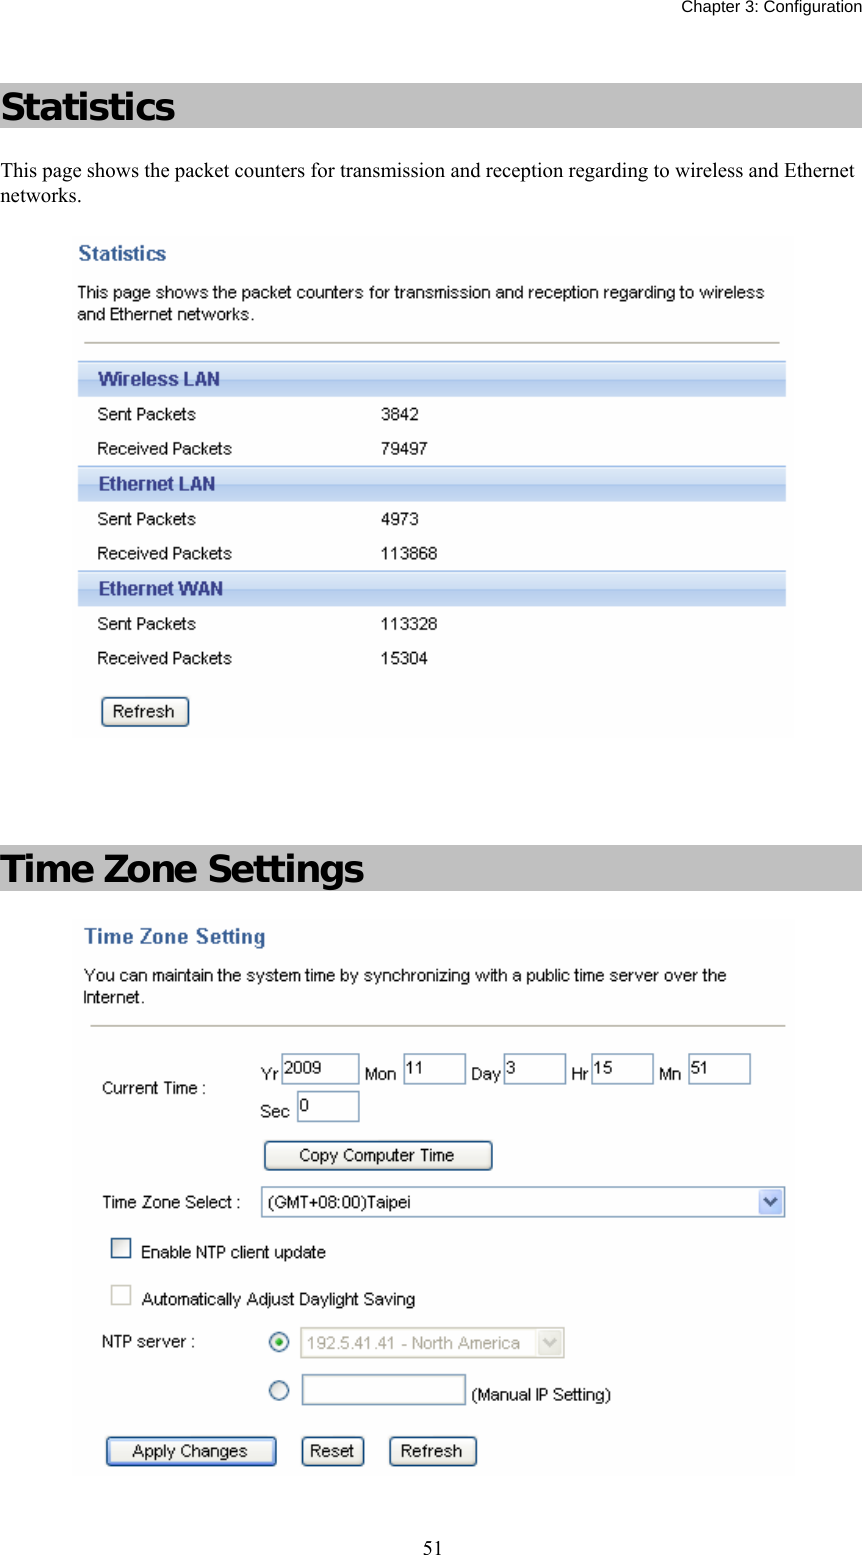   Chapter 3: Configuration  51 Statistics This page shows the packet counters for transmission and reception regarding to wireless and Ethernet networks.     Time Zone Settings  